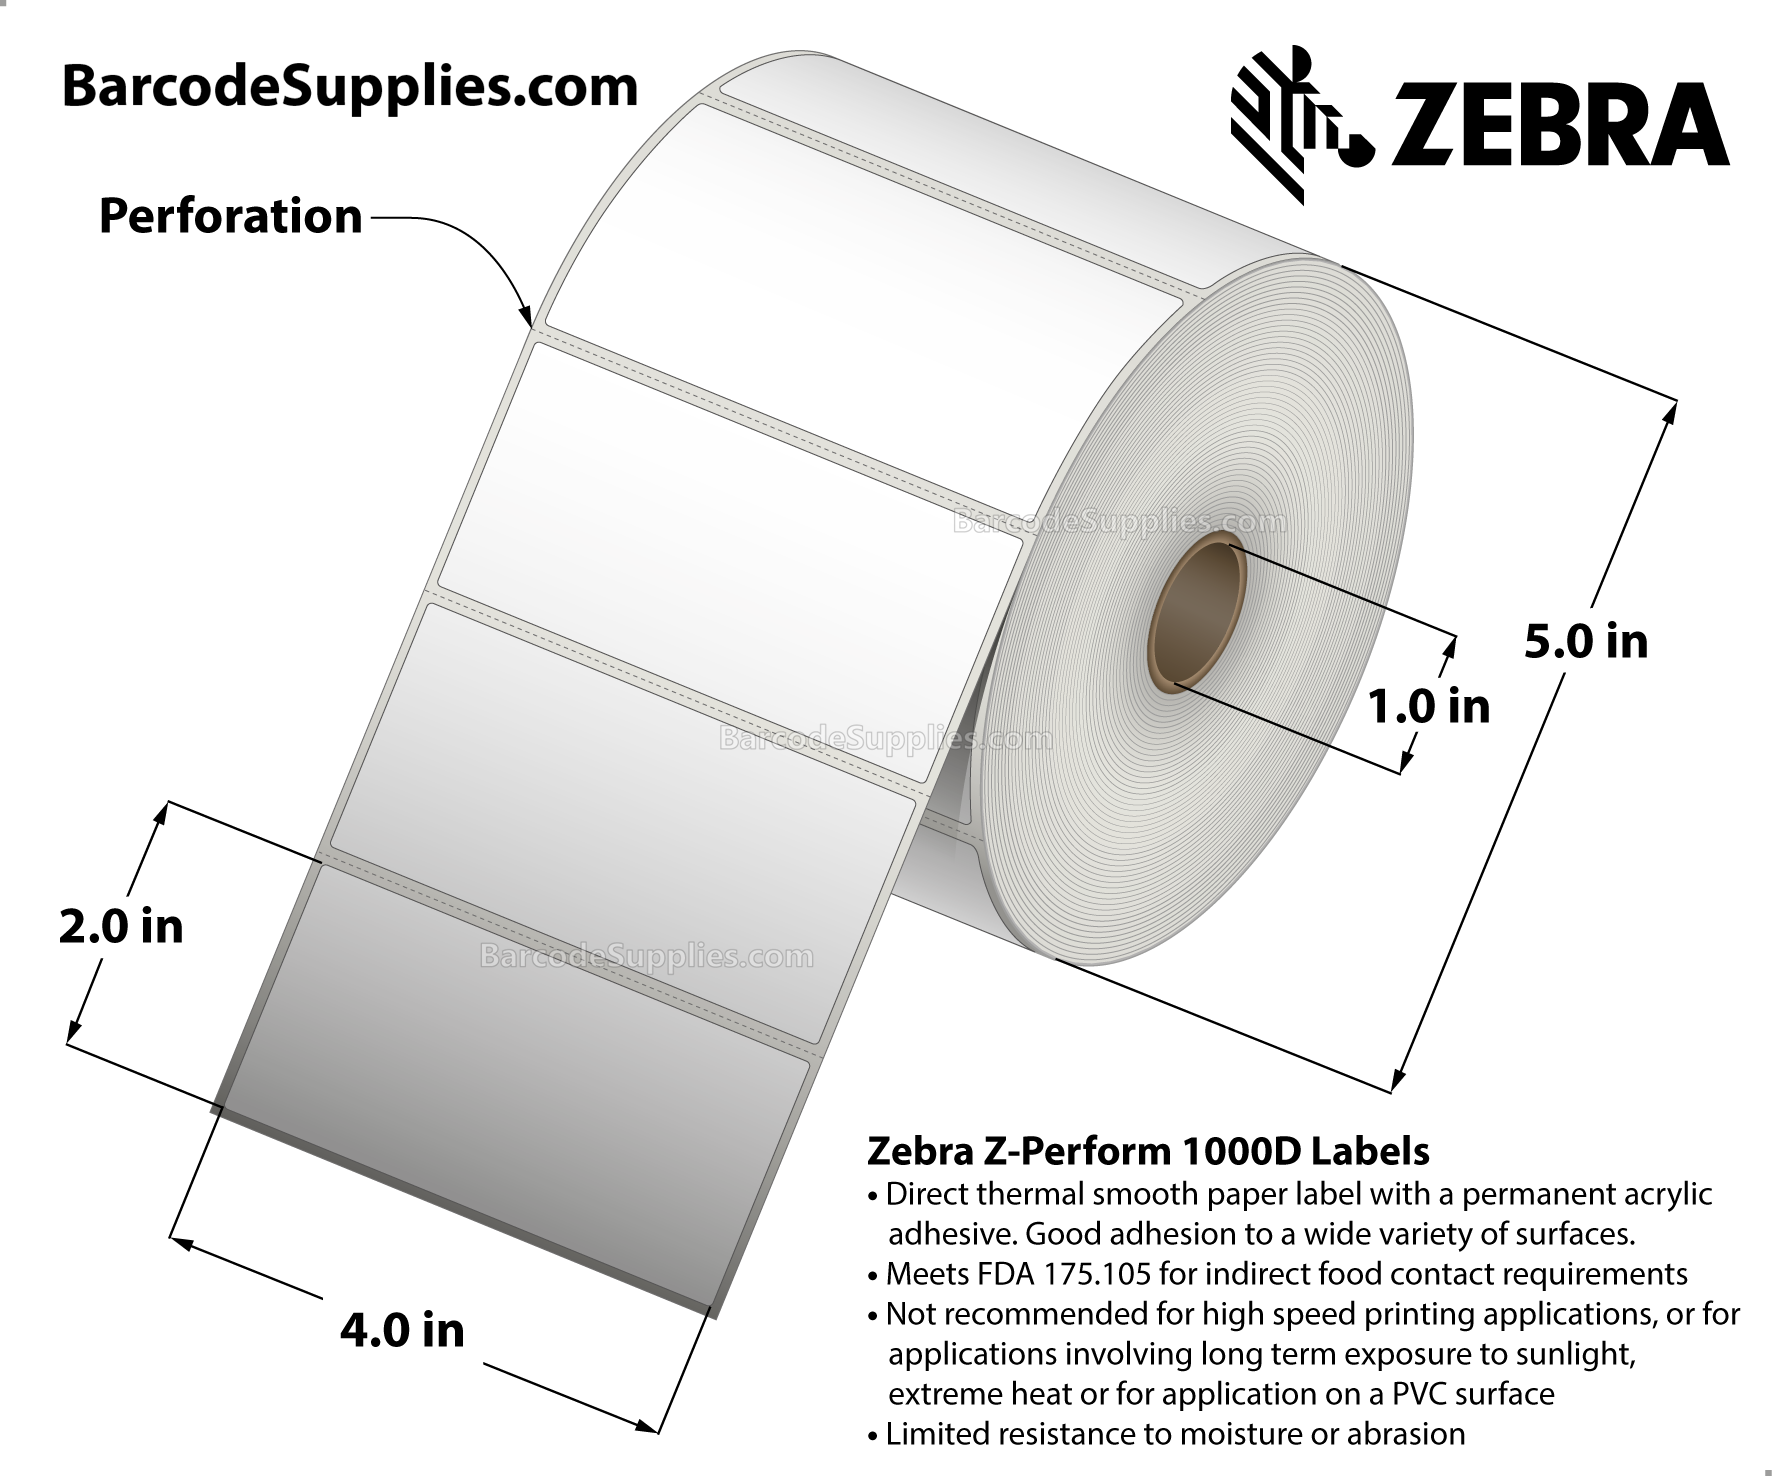 4 x 2 Direct Thermal White Z-Perform 1000D Labels With Permanent Adhesive - Perforated - 1240 Labels Per Roll - Carton Of 6 Rolls - 7440 Labels Total - MPN: 10026379